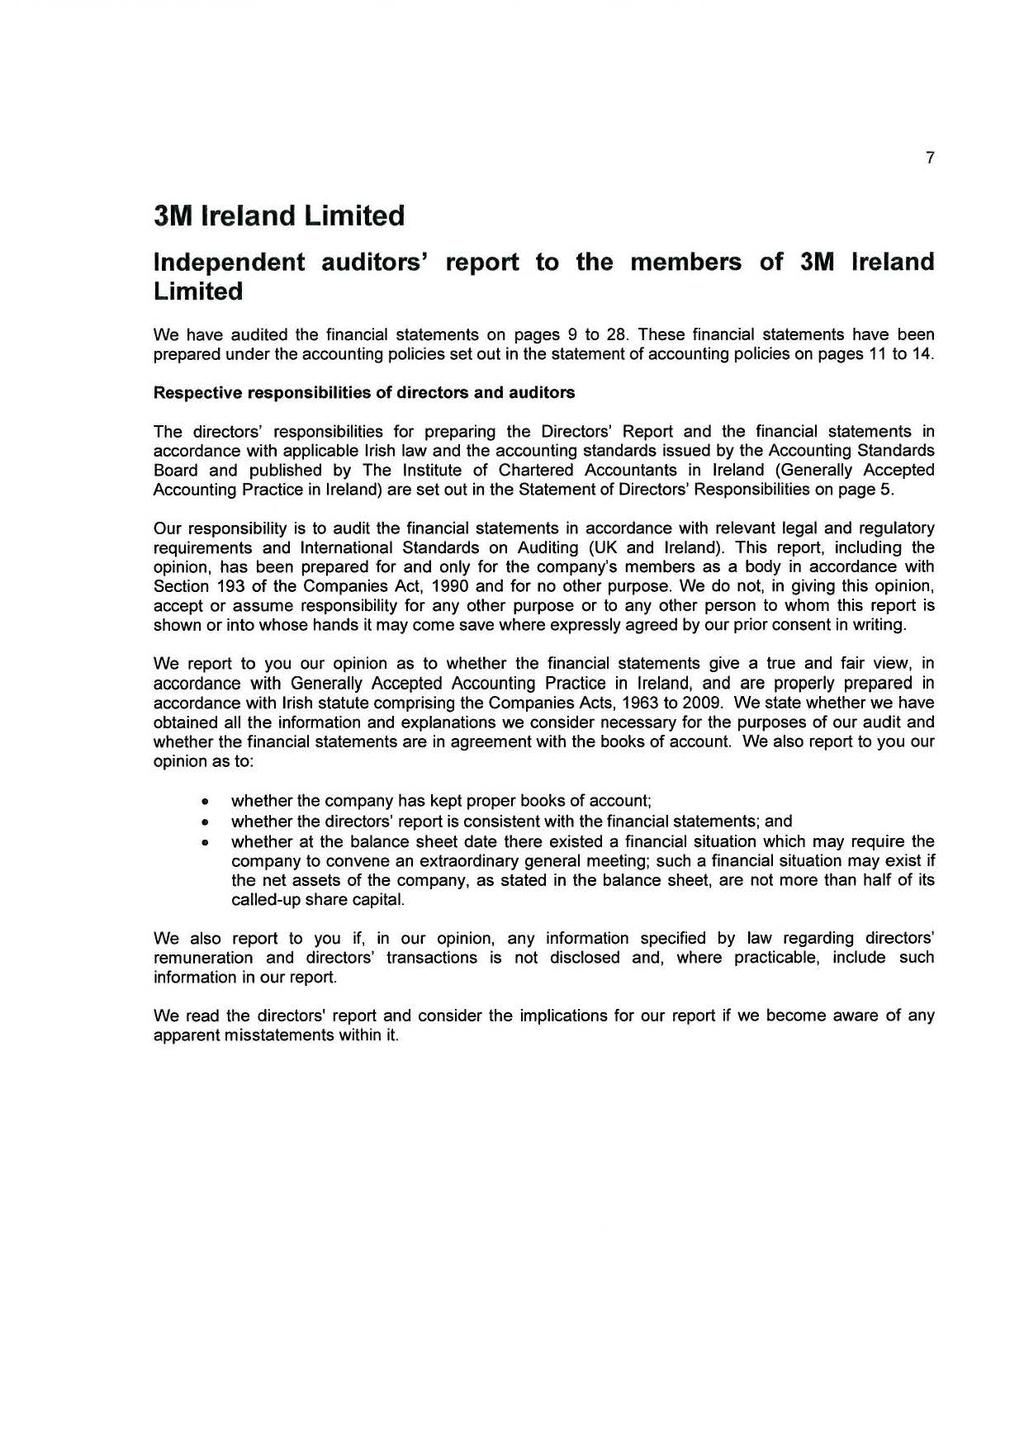 7 Independent auditors' report to the members of 3M Ireland Limited We have audited the financial statements on pages 9 to 28.